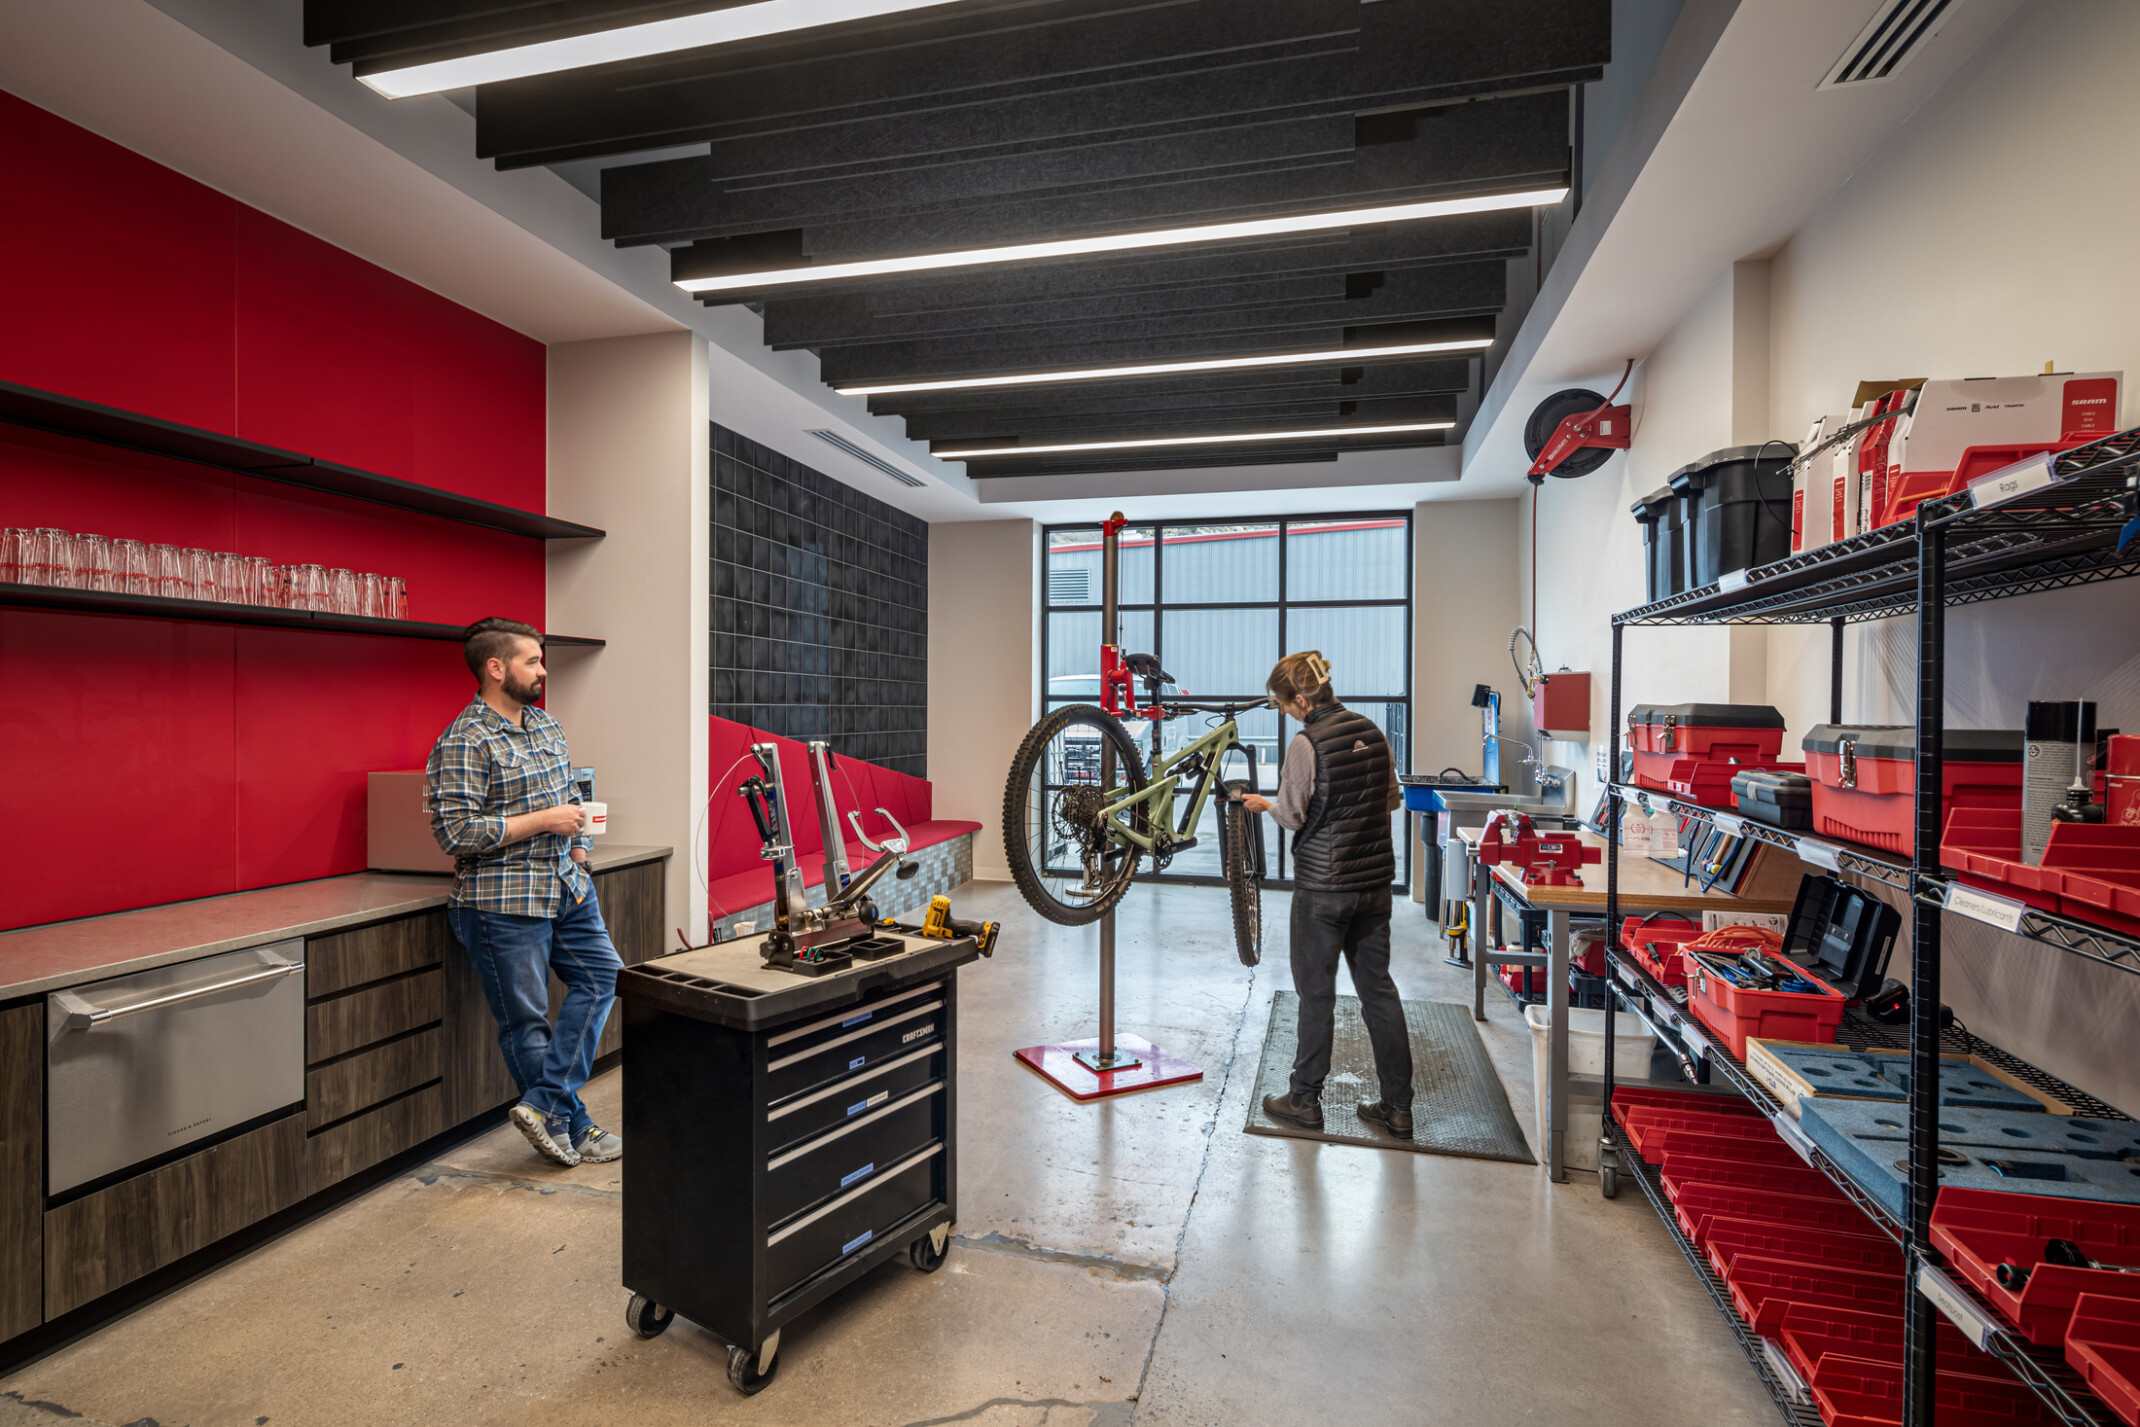 An employee fixes their bike while chatting with a coworker in the bike barn detailed in a bold palette of red and black.